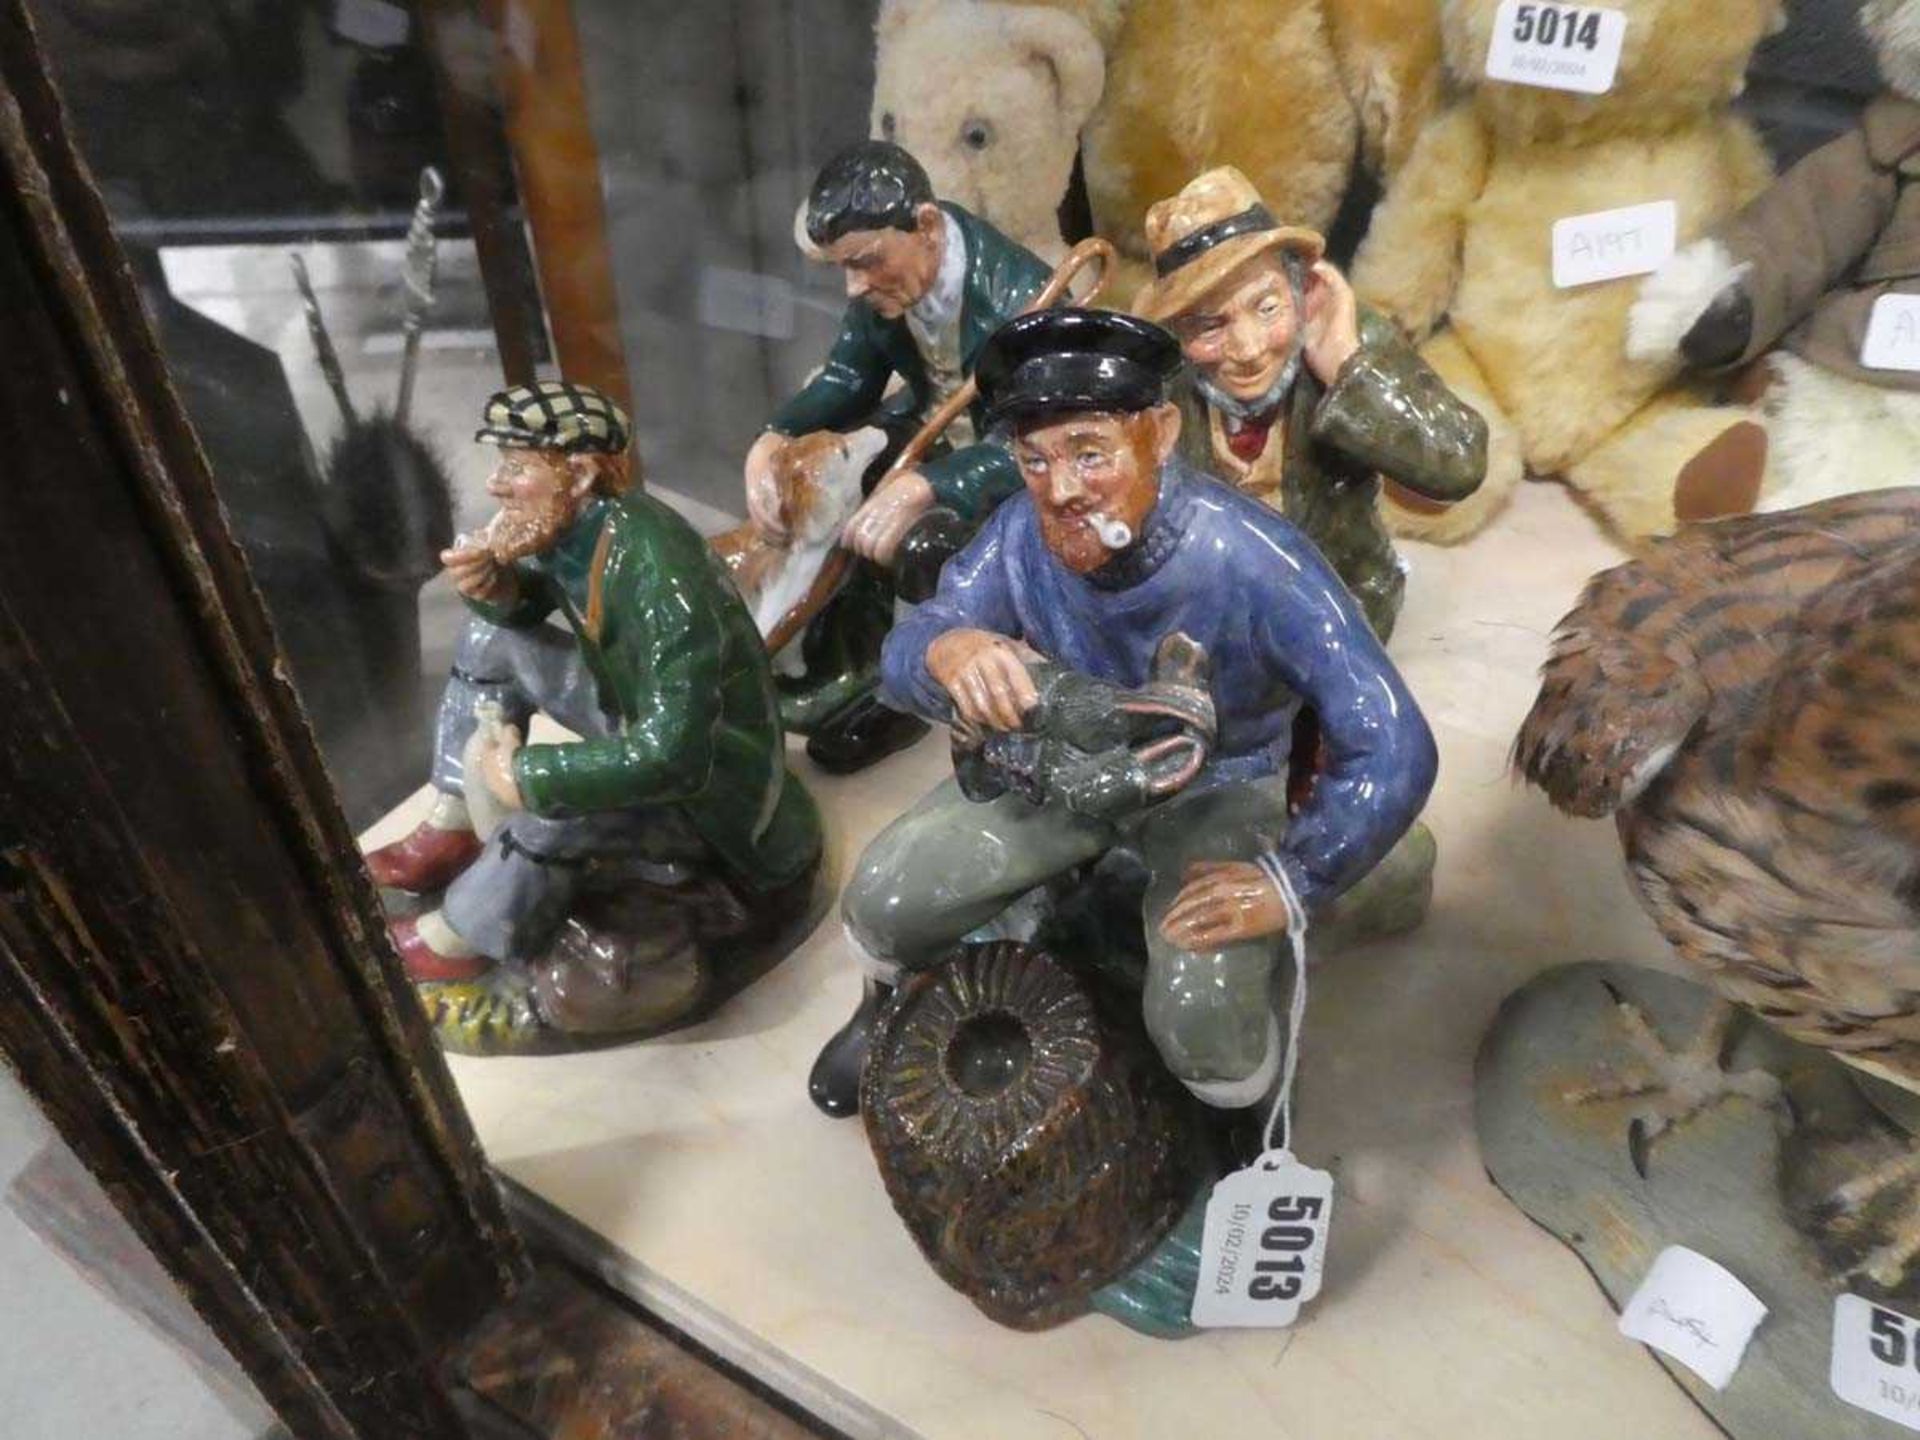 Four Royal Doulton figures: HN2042 Owd Willum, HN2317 The Lobster Man, HN2325 The Master and